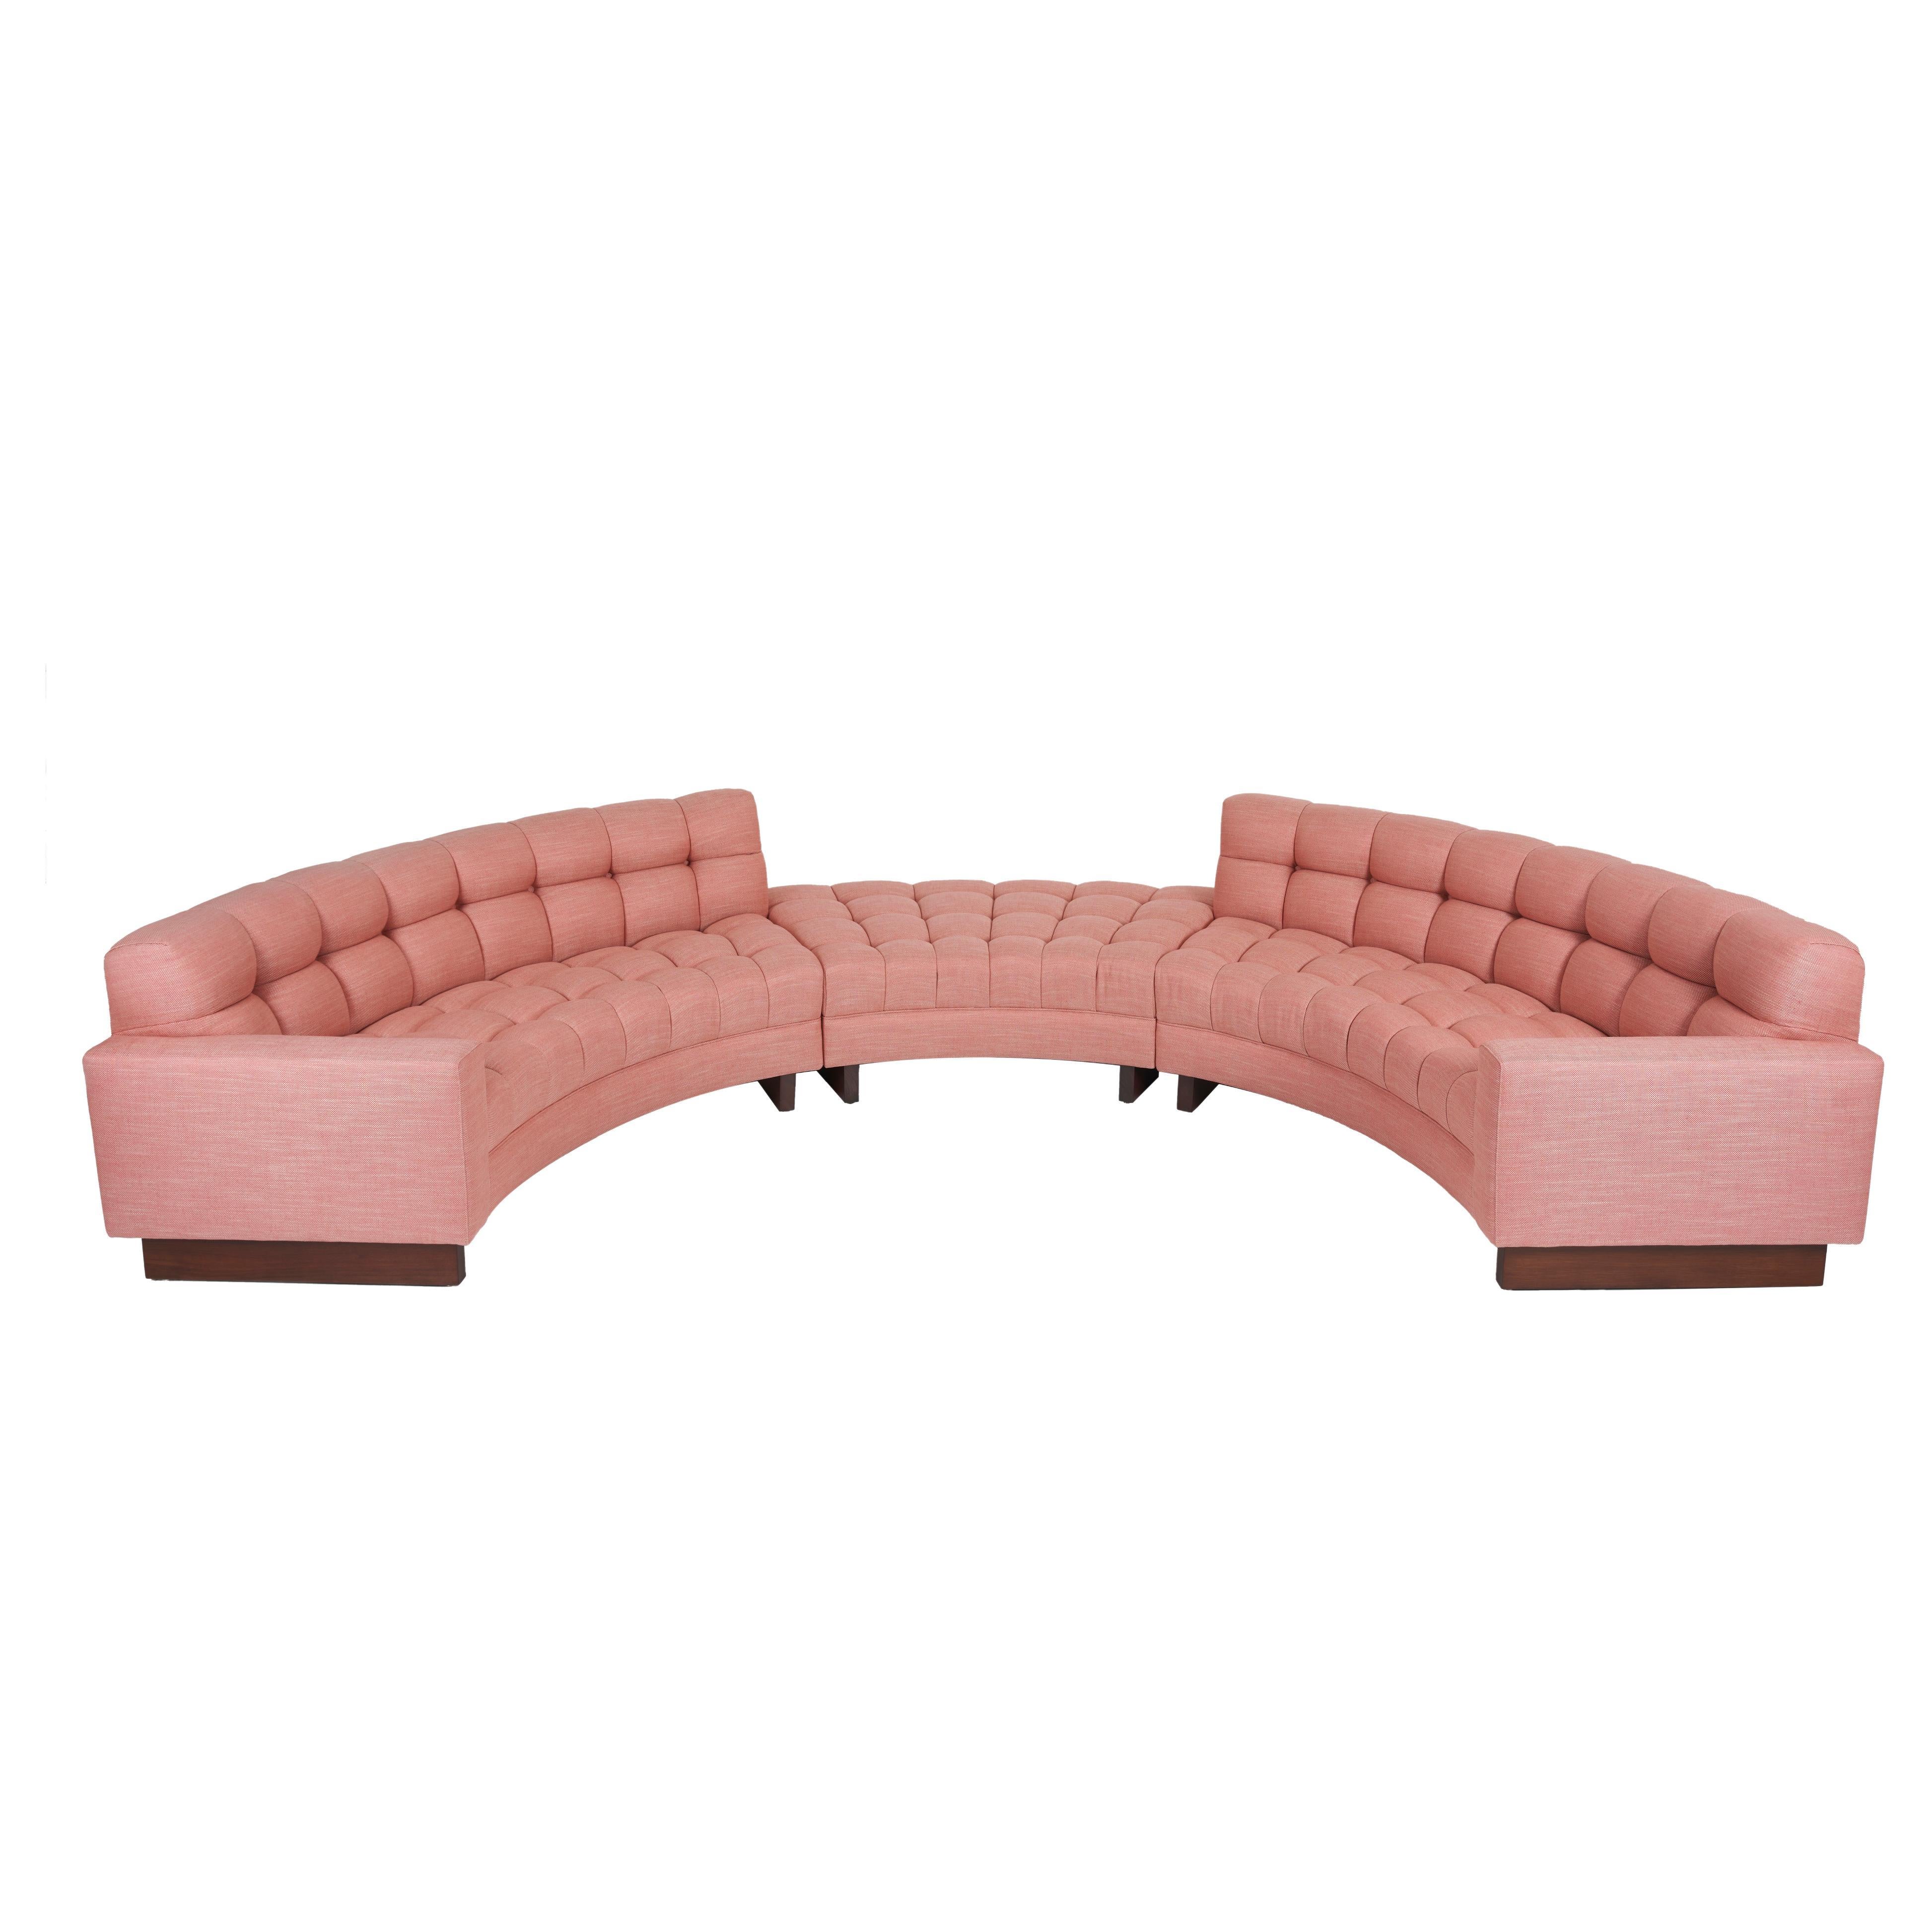 Biscuit Tufted, Guava Colored, Curved Three Piece Sectional by William Haines